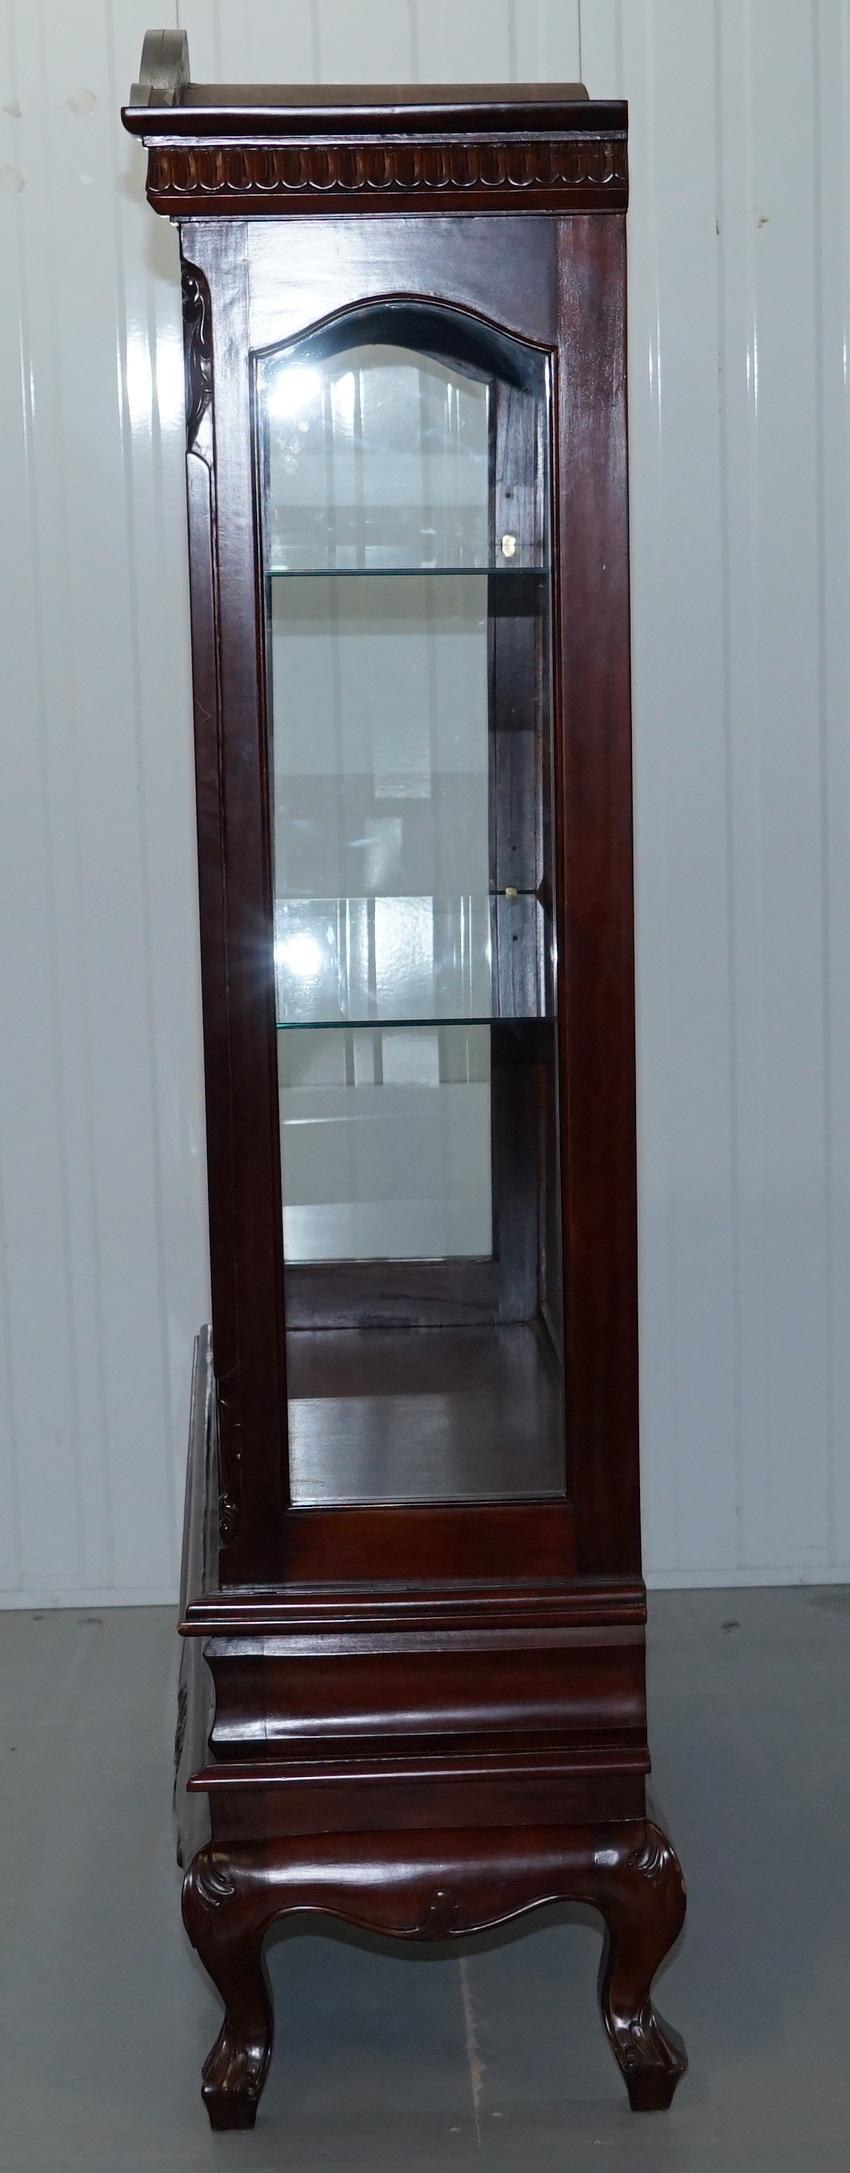 Solid Mahogany with New Glass Shelves Ornately Carved Wood Display Cabinet 12